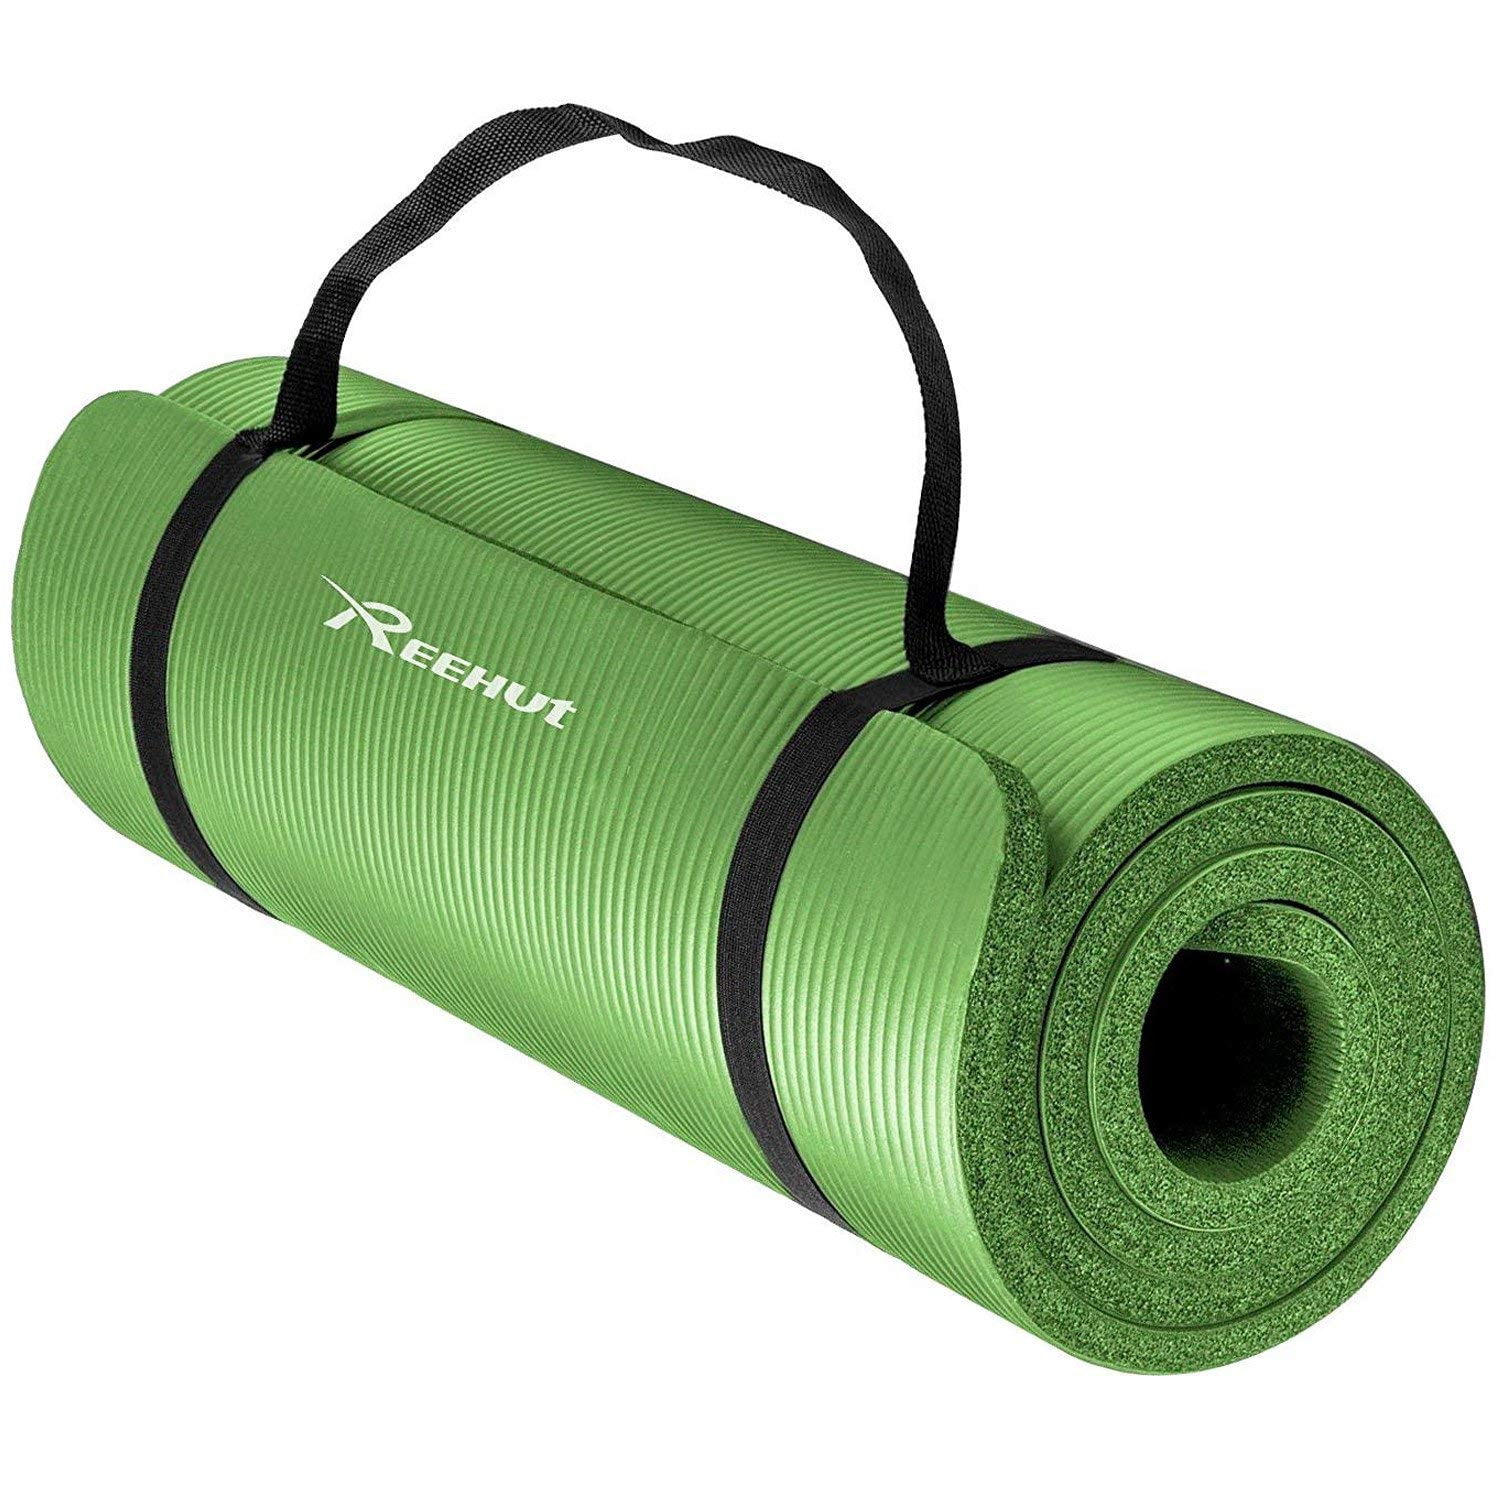 Reehut 1/2-Inch Extra Thick High Density NBR Exercise Yoga Mat